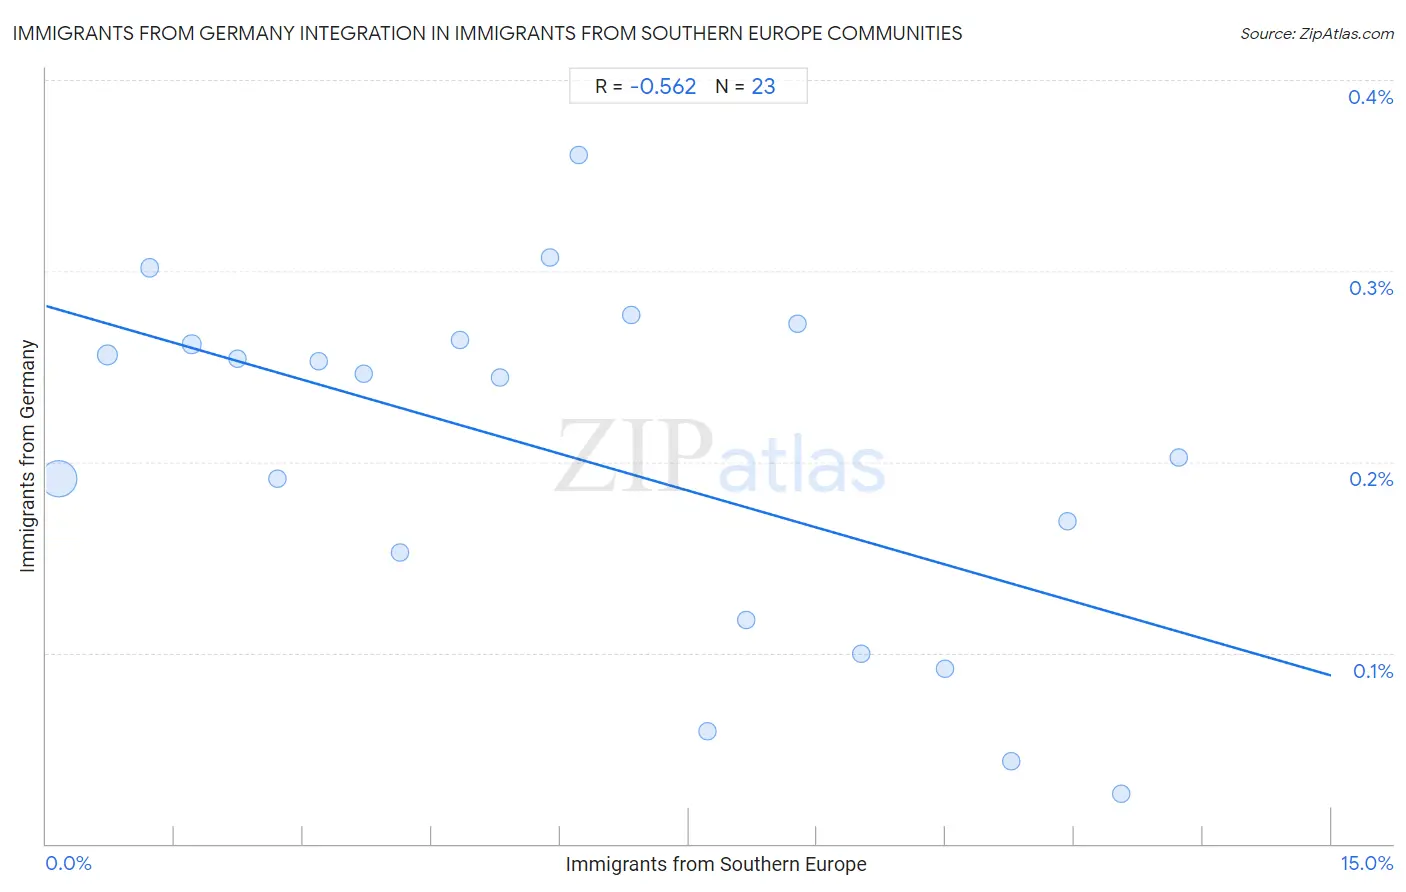 Immigrants from Southern Europe Integration in Immigrants from Germany Communities